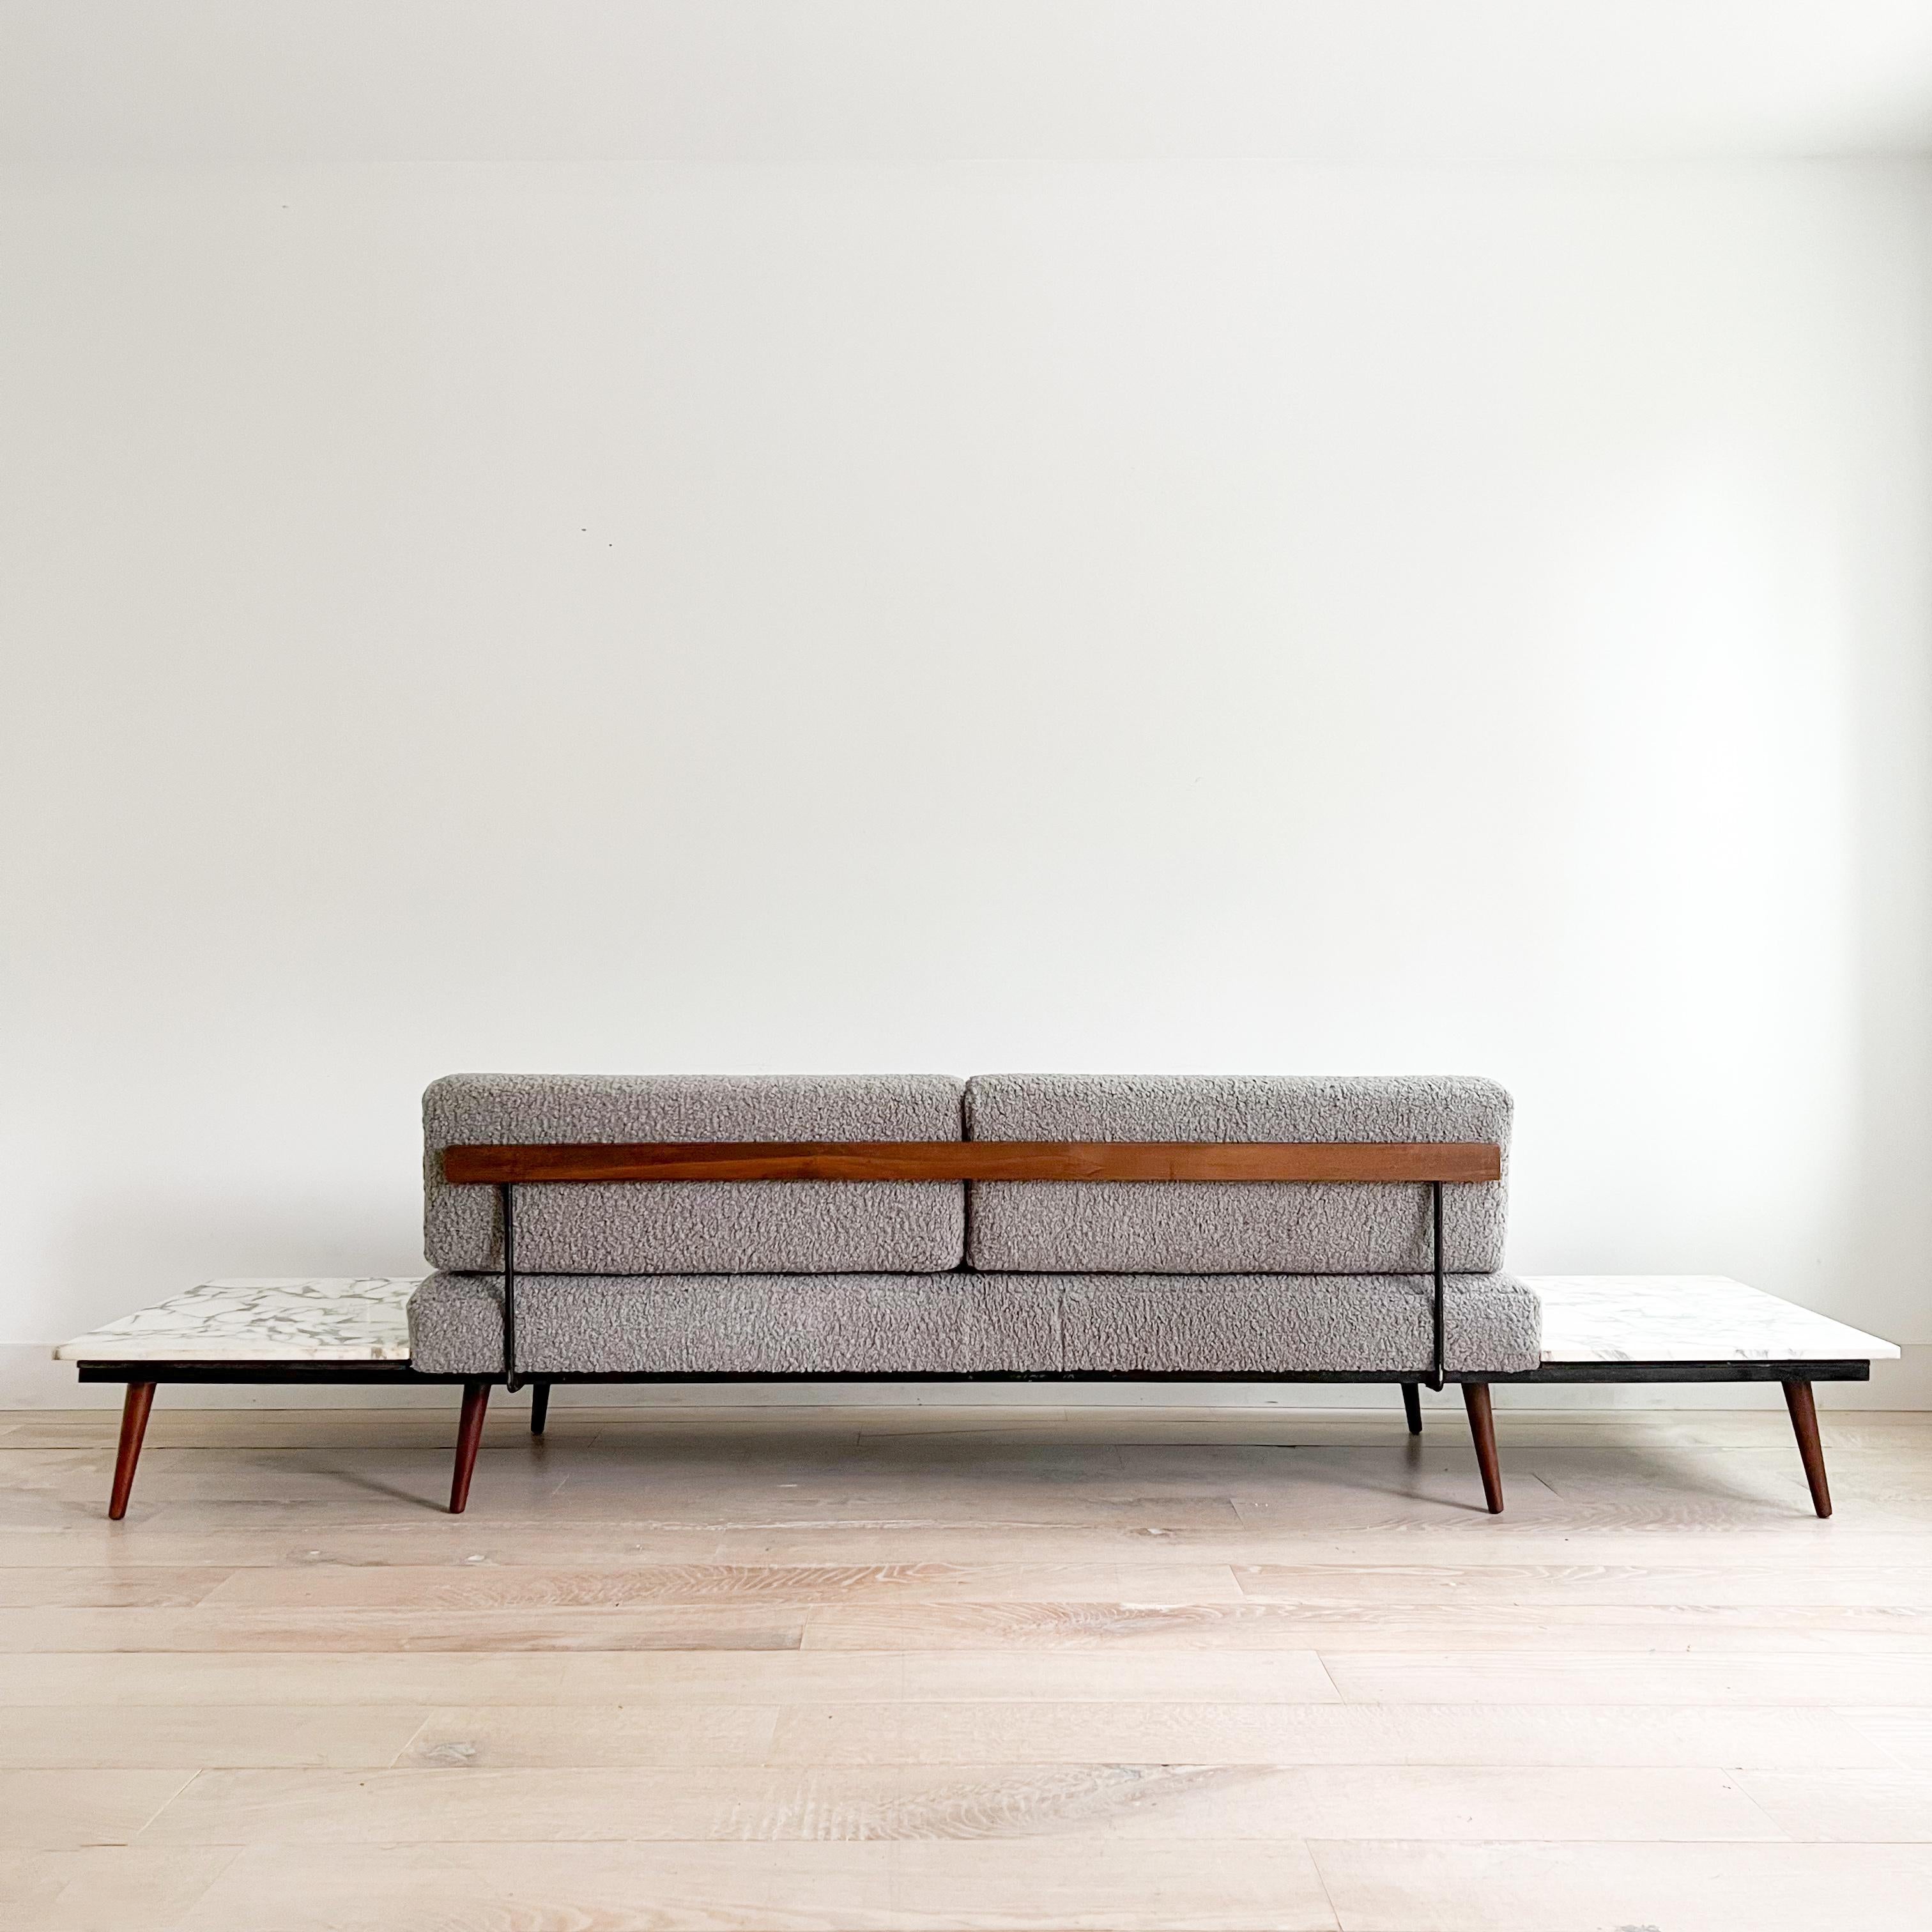 This stunning mid-century modern gondola sofa by Adrian Pearsall features built-in marble end tables. Recently updated with new foam and luxurious grey shearling upholstery. The wooden trim and legs show light scuffing and scratching, consistent